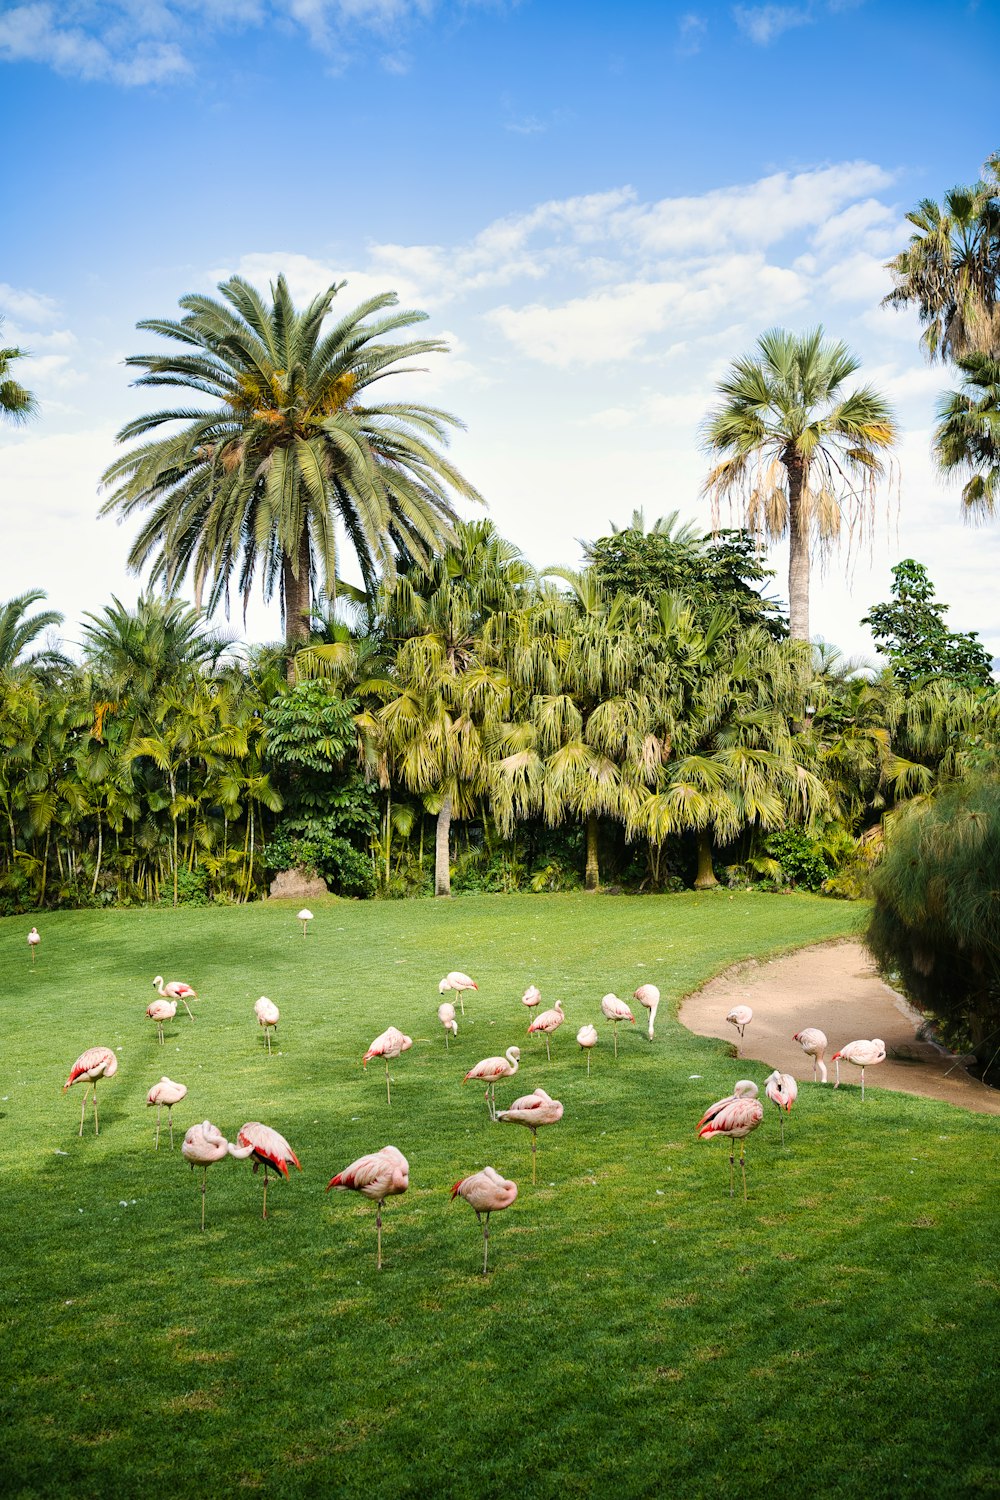 a group of flamingos in a grassy area with trees in the background